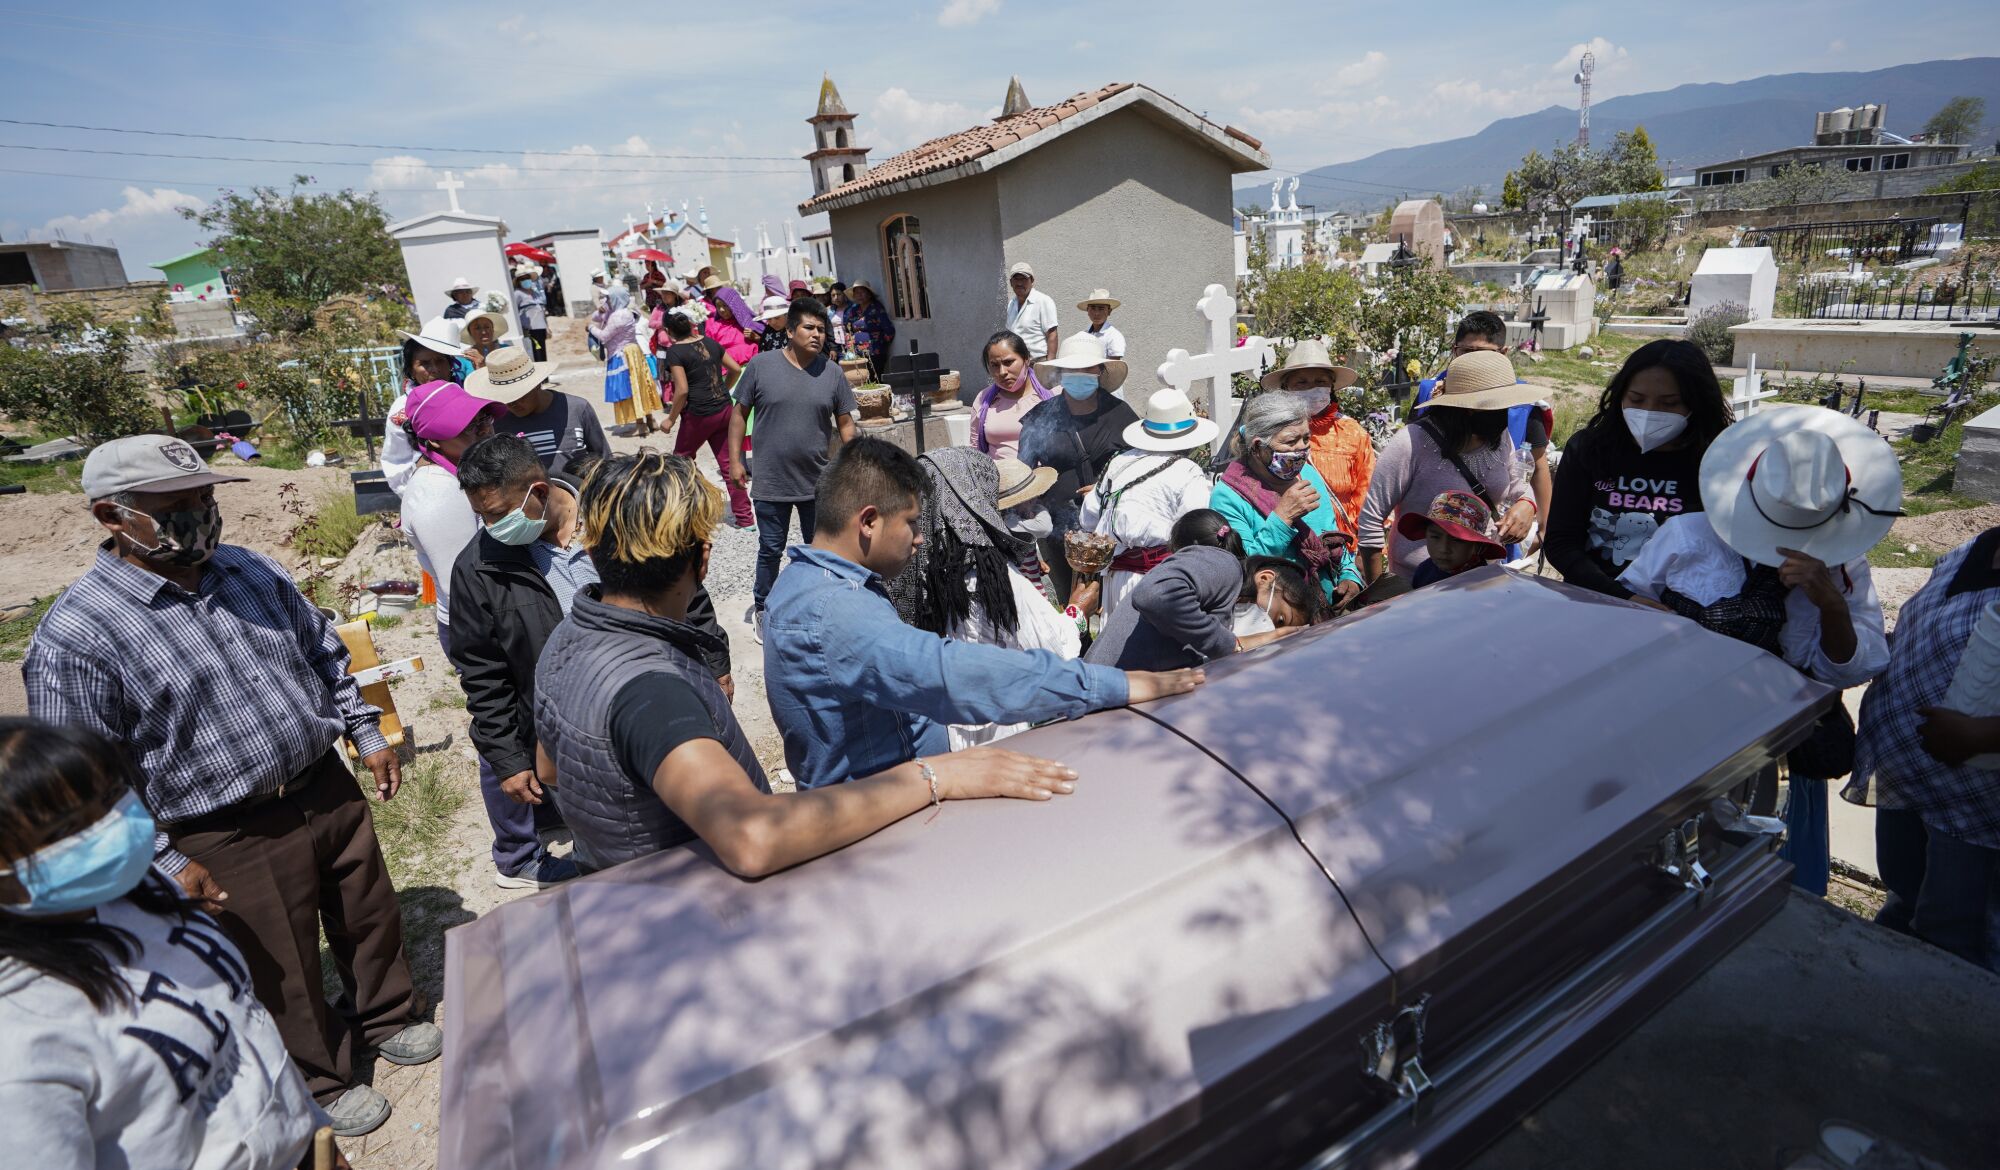 The casket of Maria Eugenia Chavez-Segovia is placed at the center of the cemetery for a last goodbye